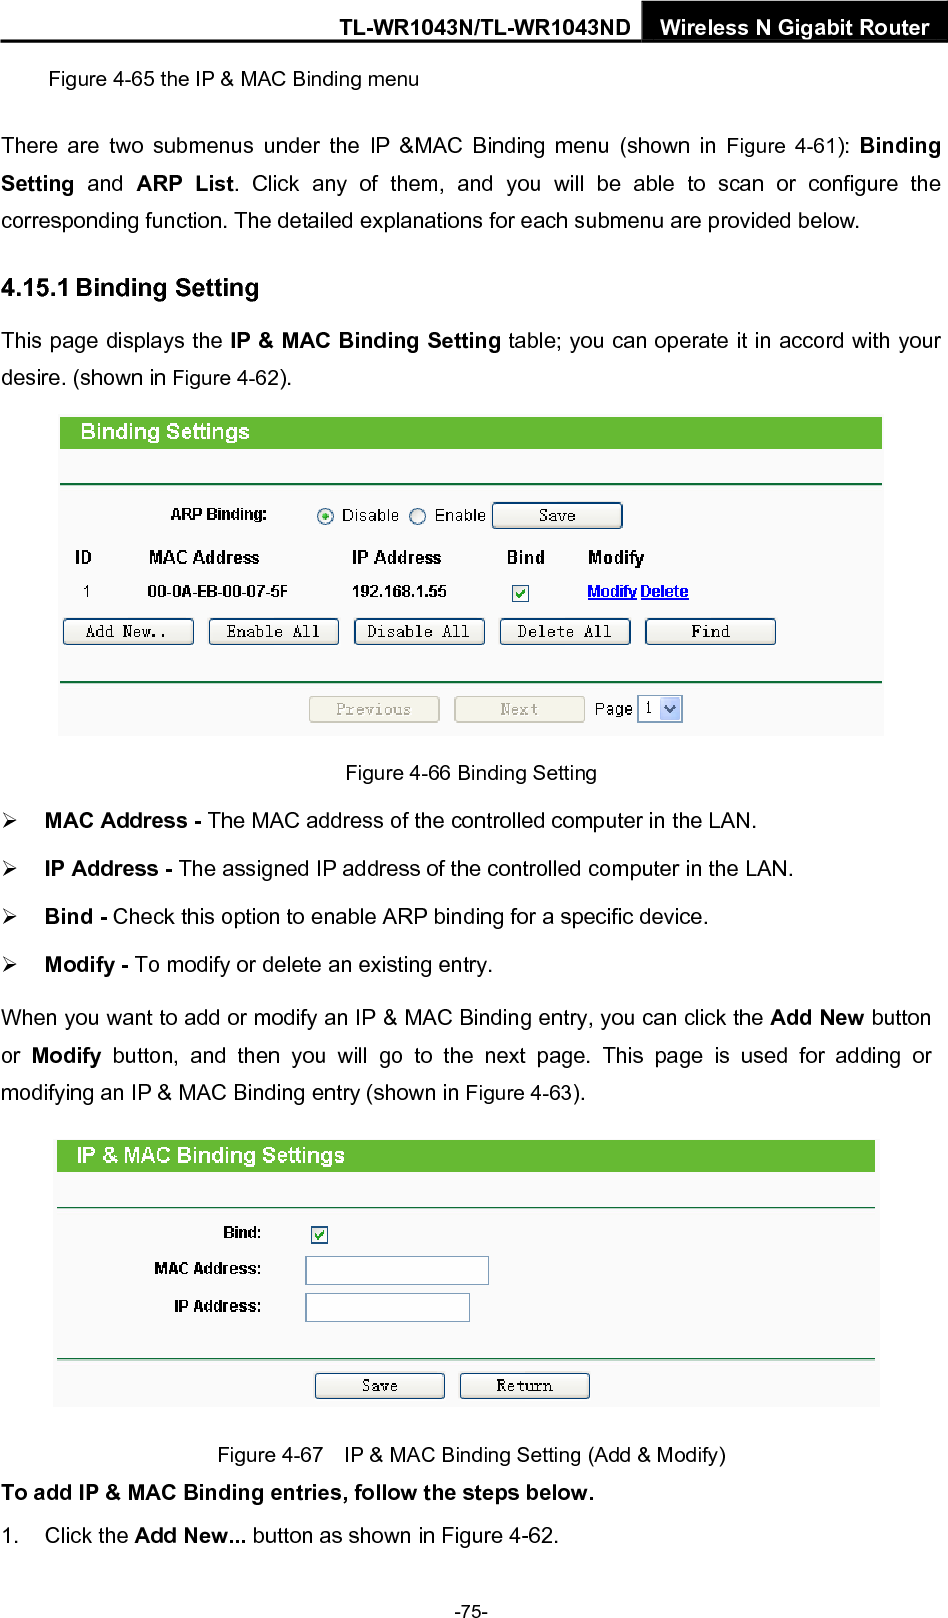 TL-WR1043N/TL-WR1043ND Wireless N Gigabit Router Figure 4-65 the IP &amp; MAC Binding menu There are two submenus under the IP &amp;MAC Binding menu (shown in Figure 4-61):  Binding Setting  and ARP List. Click any of them, and you will be able to scan or configure the corresponding function. The detailed explanations for each submenu are provided below. 4.15.1 Binding Setting This page displays the IP &amp; MAC Binding Setting table; you can operate it in accord with your desire. (shown in Figure 4-62).   Figure 4-66 Binding Setting ¾ MAC Address - The MAC address of the controlled computer in the LAN.   ¾ IP Address - The assigned IP address of the controlled computer in the LAN.   ¾ Bind - Check this option to enable ARP binding for a specific device.   ¾ Modify - To modify or delete an existing entry.   When you want to add or modify an IP &amp; MAC Binding entry, you can click the Add New button or  Modify button, and then you will go to the next page. This page is used for adding or modifying an IP &amp; MAC Binding entry (shown in Figure 4-63).    Figure 4-67    IP &amp; MAC Binding Setting (Add &amp; Modify) To add IP &amp; MAC Binding entries, follow the steps below. 1. Click the Add New... button as shown in Figure 4-62.   -75- 